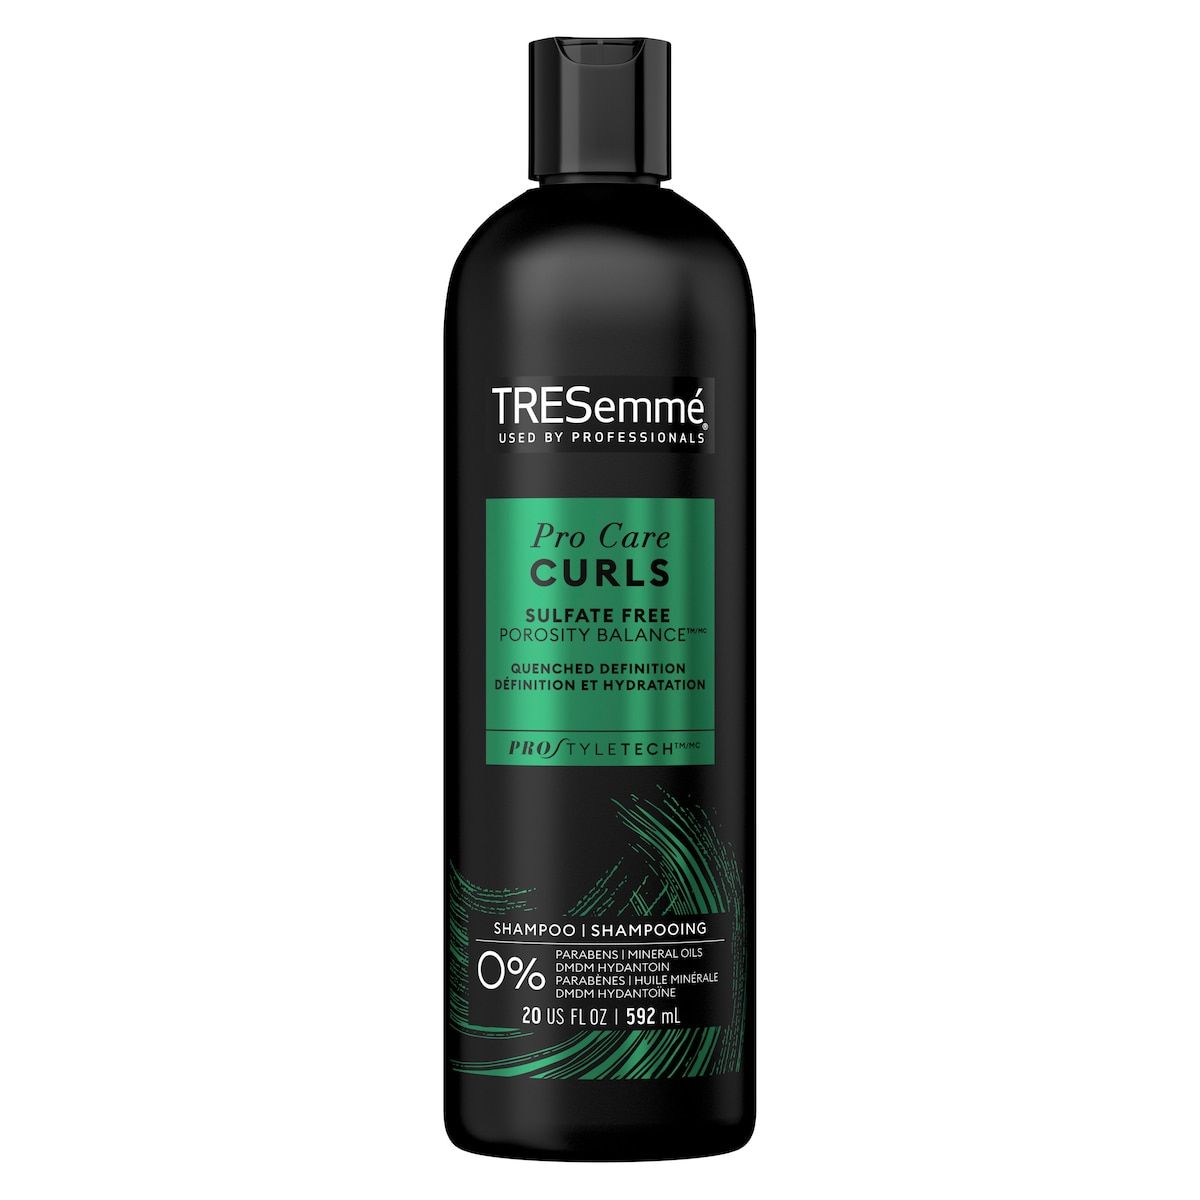 Pro Care Curls Sulfate-Free Shampoo for Curly Hair | TRESemmé US